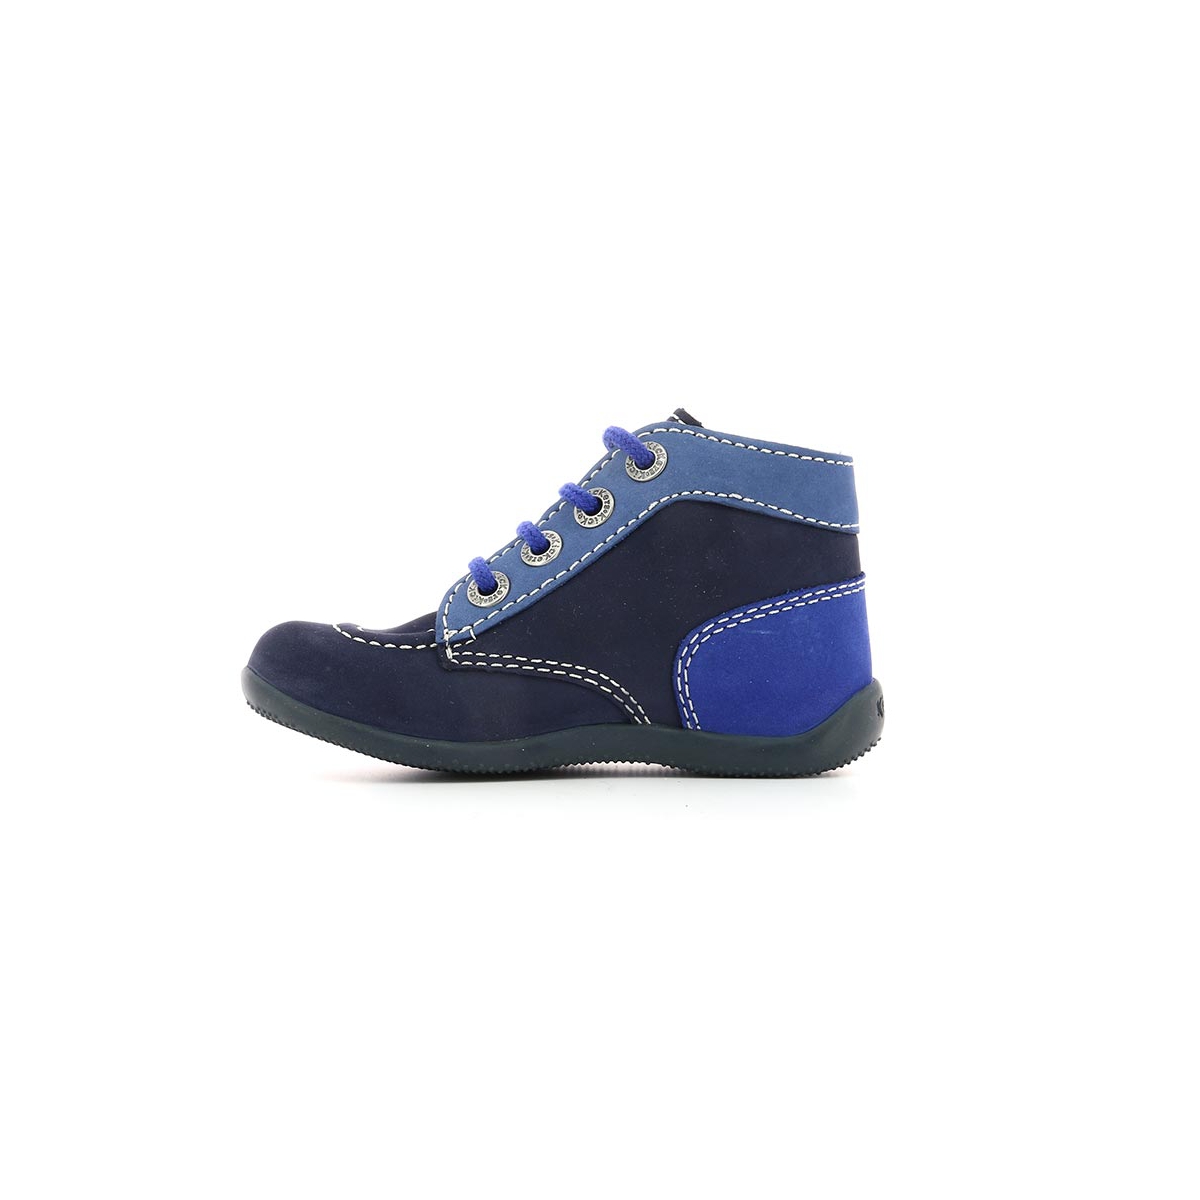 Kid's boots Bonbon navy - shoes for Kids - Kickers